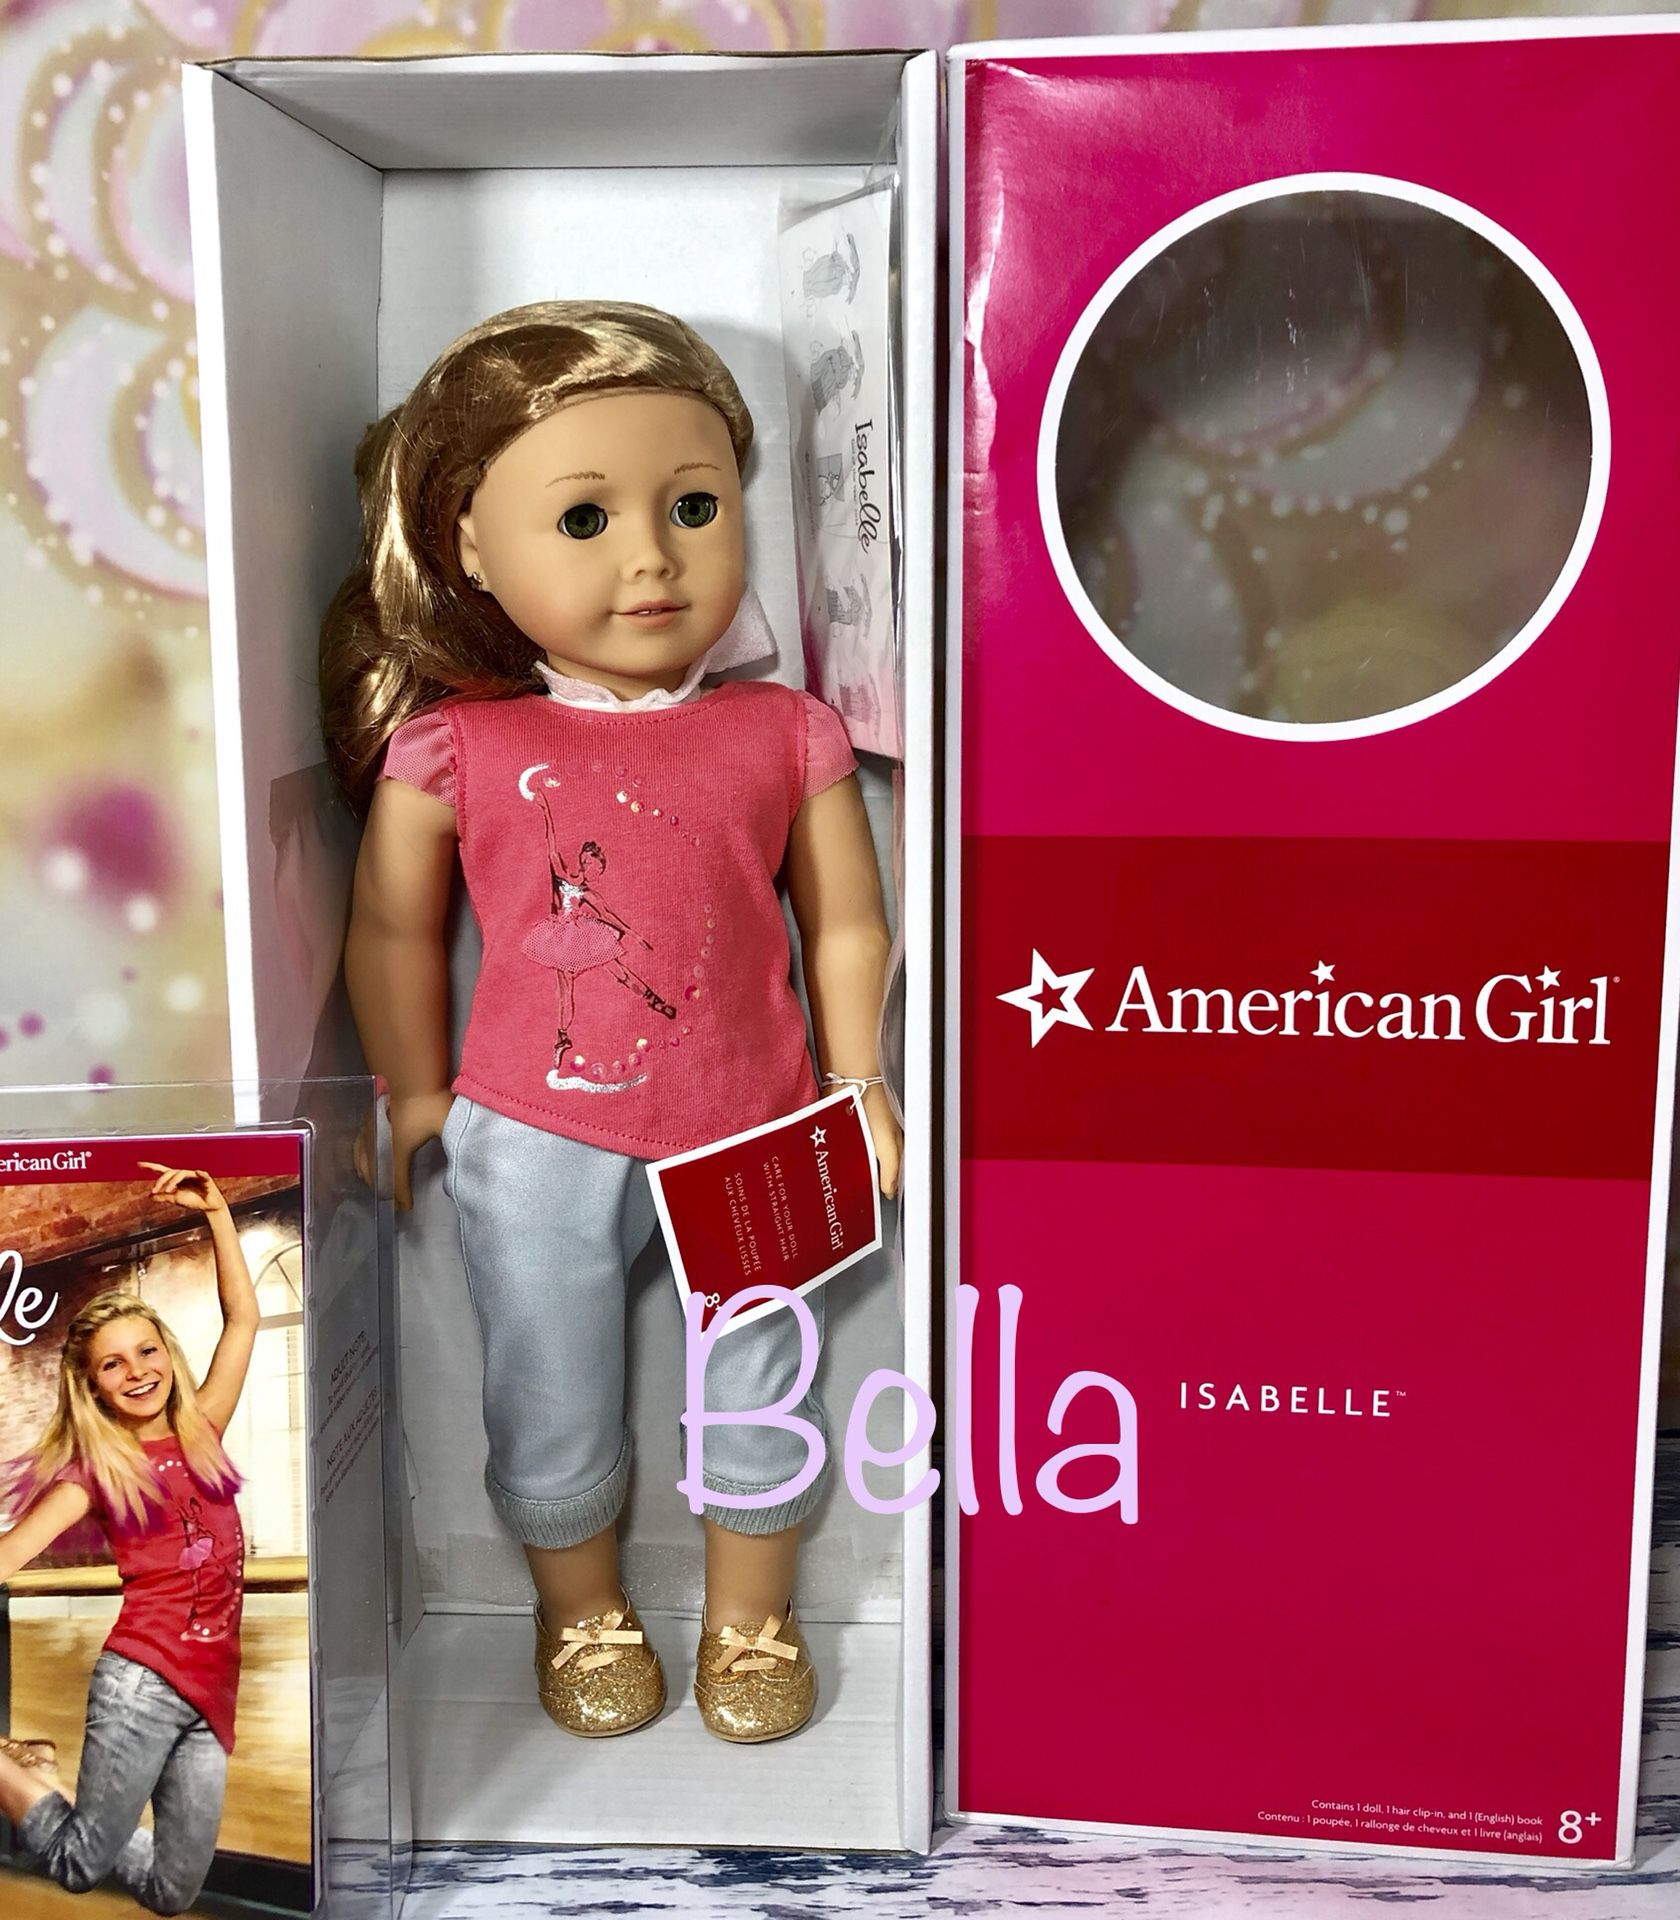 American Girl Doll ISABELLE BRAND NEW IN BOX With book earrings and hair highlighted Retired